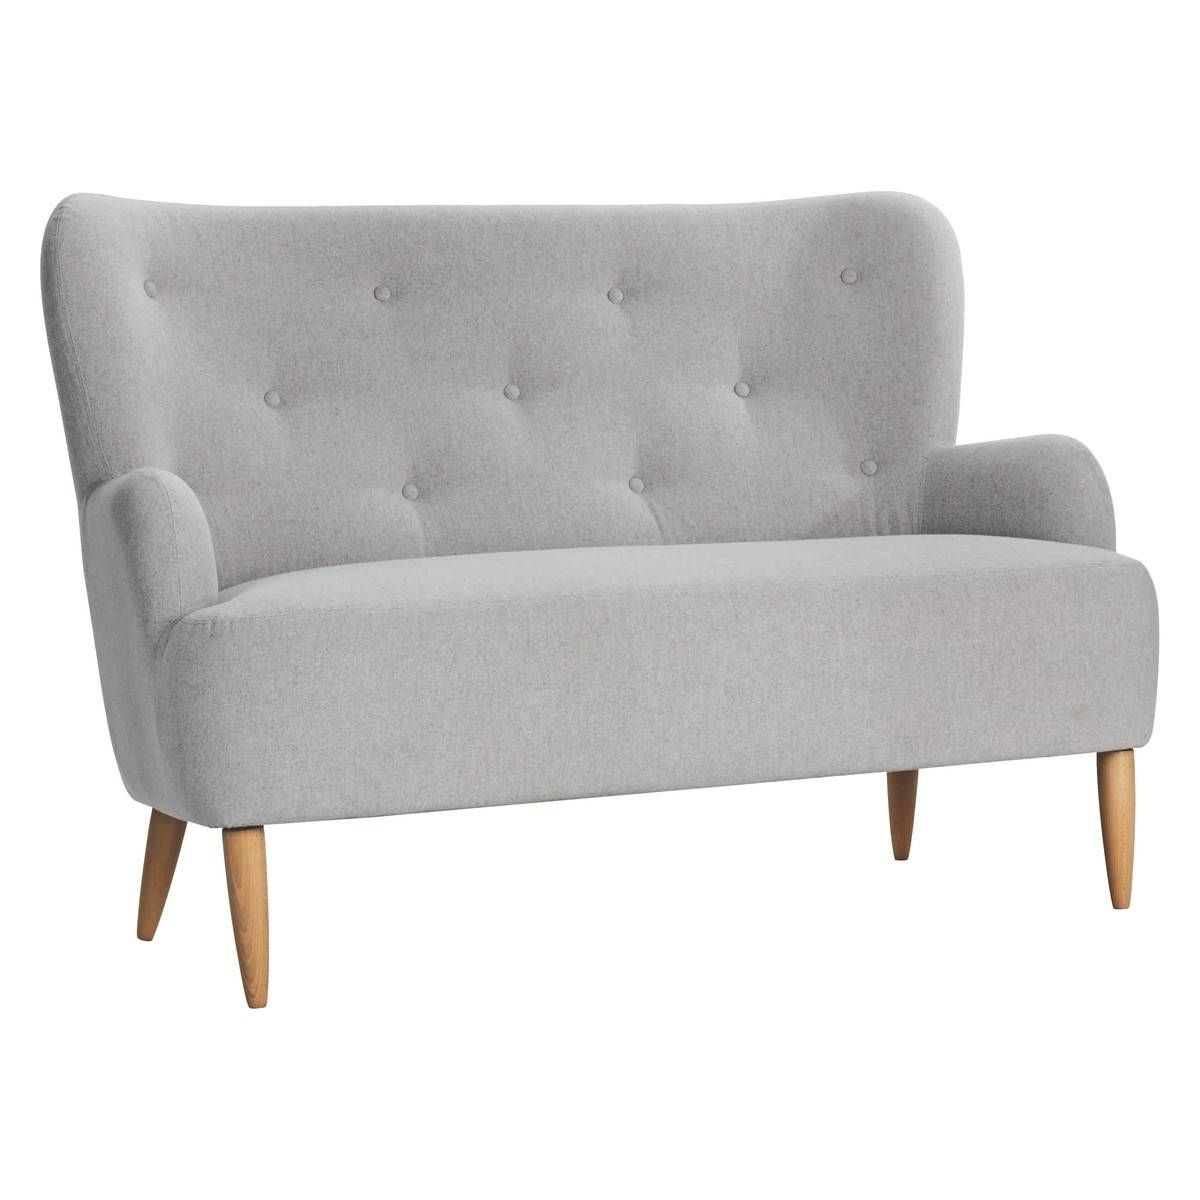 Wilmot Grey Wool Mix 2 Seater Sofa | Buy Now At Habitat Uk With Regard To 2 Seater Sofas (View 1 of 30)